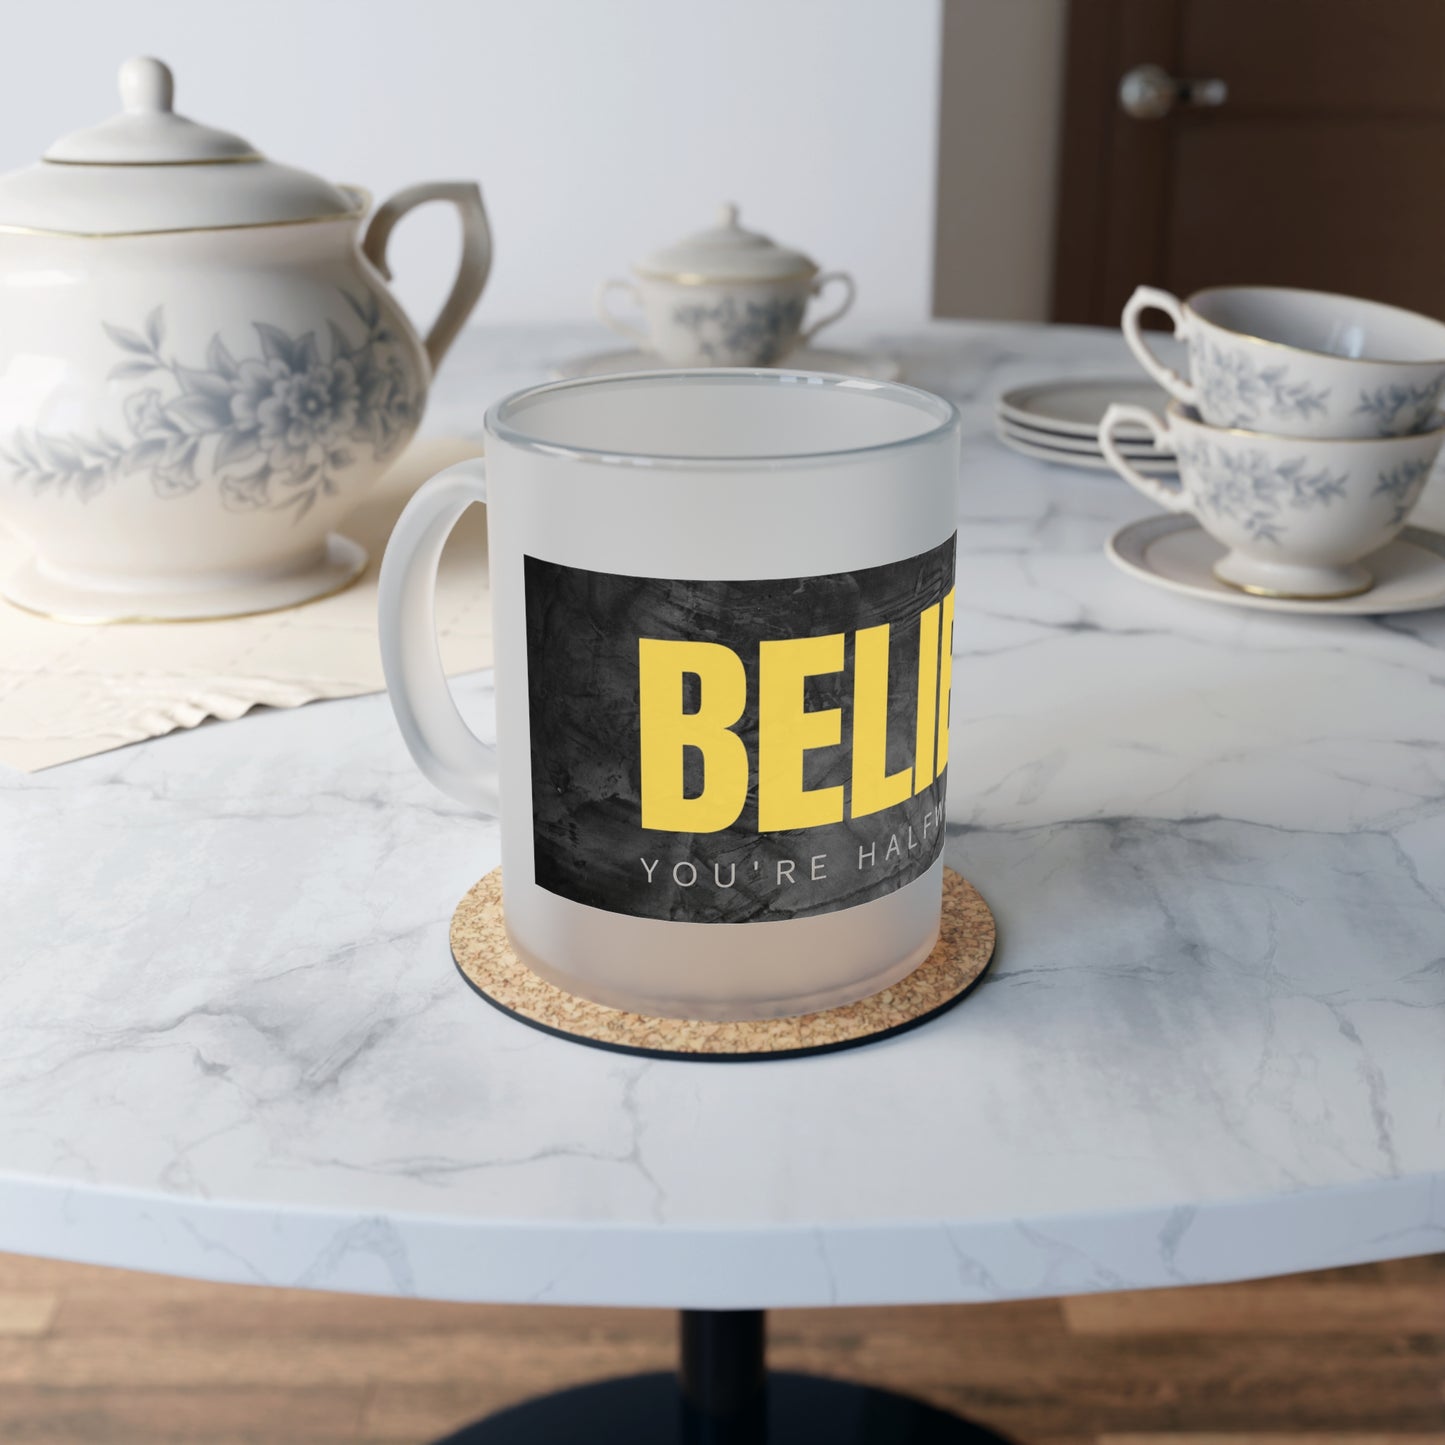 PoM's Self Motivation Bundle (#MSM-B06007A): BELIEVE ... Sweatshirt (Hoody), Mouse Pad, Tea & Coffee Mug (frosted Glass, Ceramic), Bumper Sticker and Magnet (rectangle)